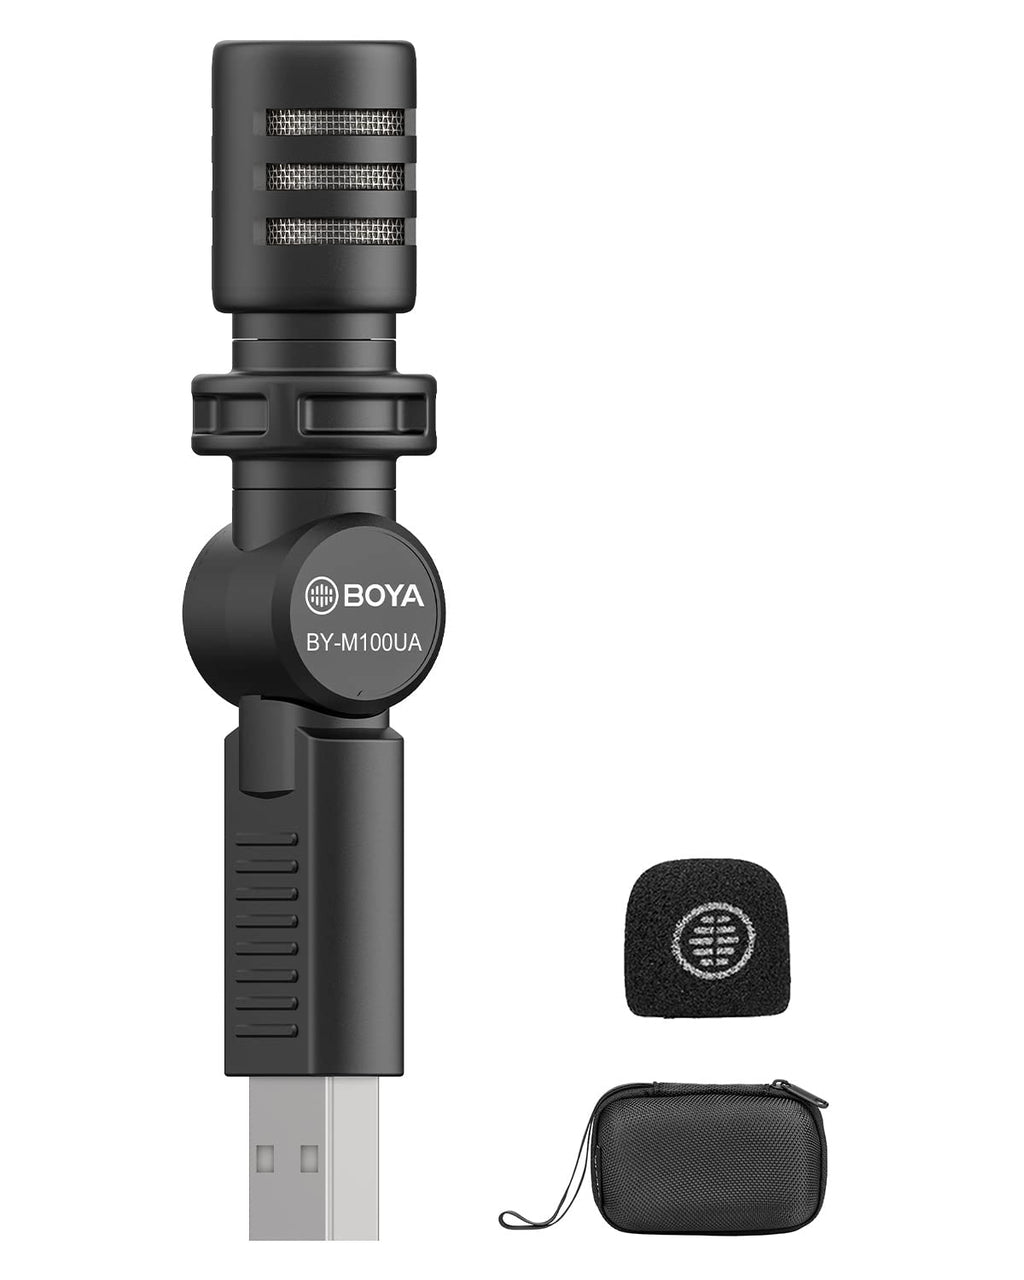  [AUSTRALIA] - BOYA BY-M100UA Mini USB Microphone,Plug&Play Computer Microphone Compatible with Laptop/PC/Mac Perfect for YouTube Interview Podcasting Video Conference BY-M100UA(USB)